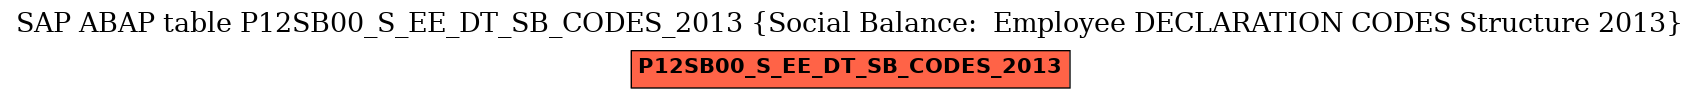 E-R Diagram for table P12SB00_S_EE_DT_SB_CODES_2013 (Social Balance:  Employee DECLARATION CODES Structure 2013)